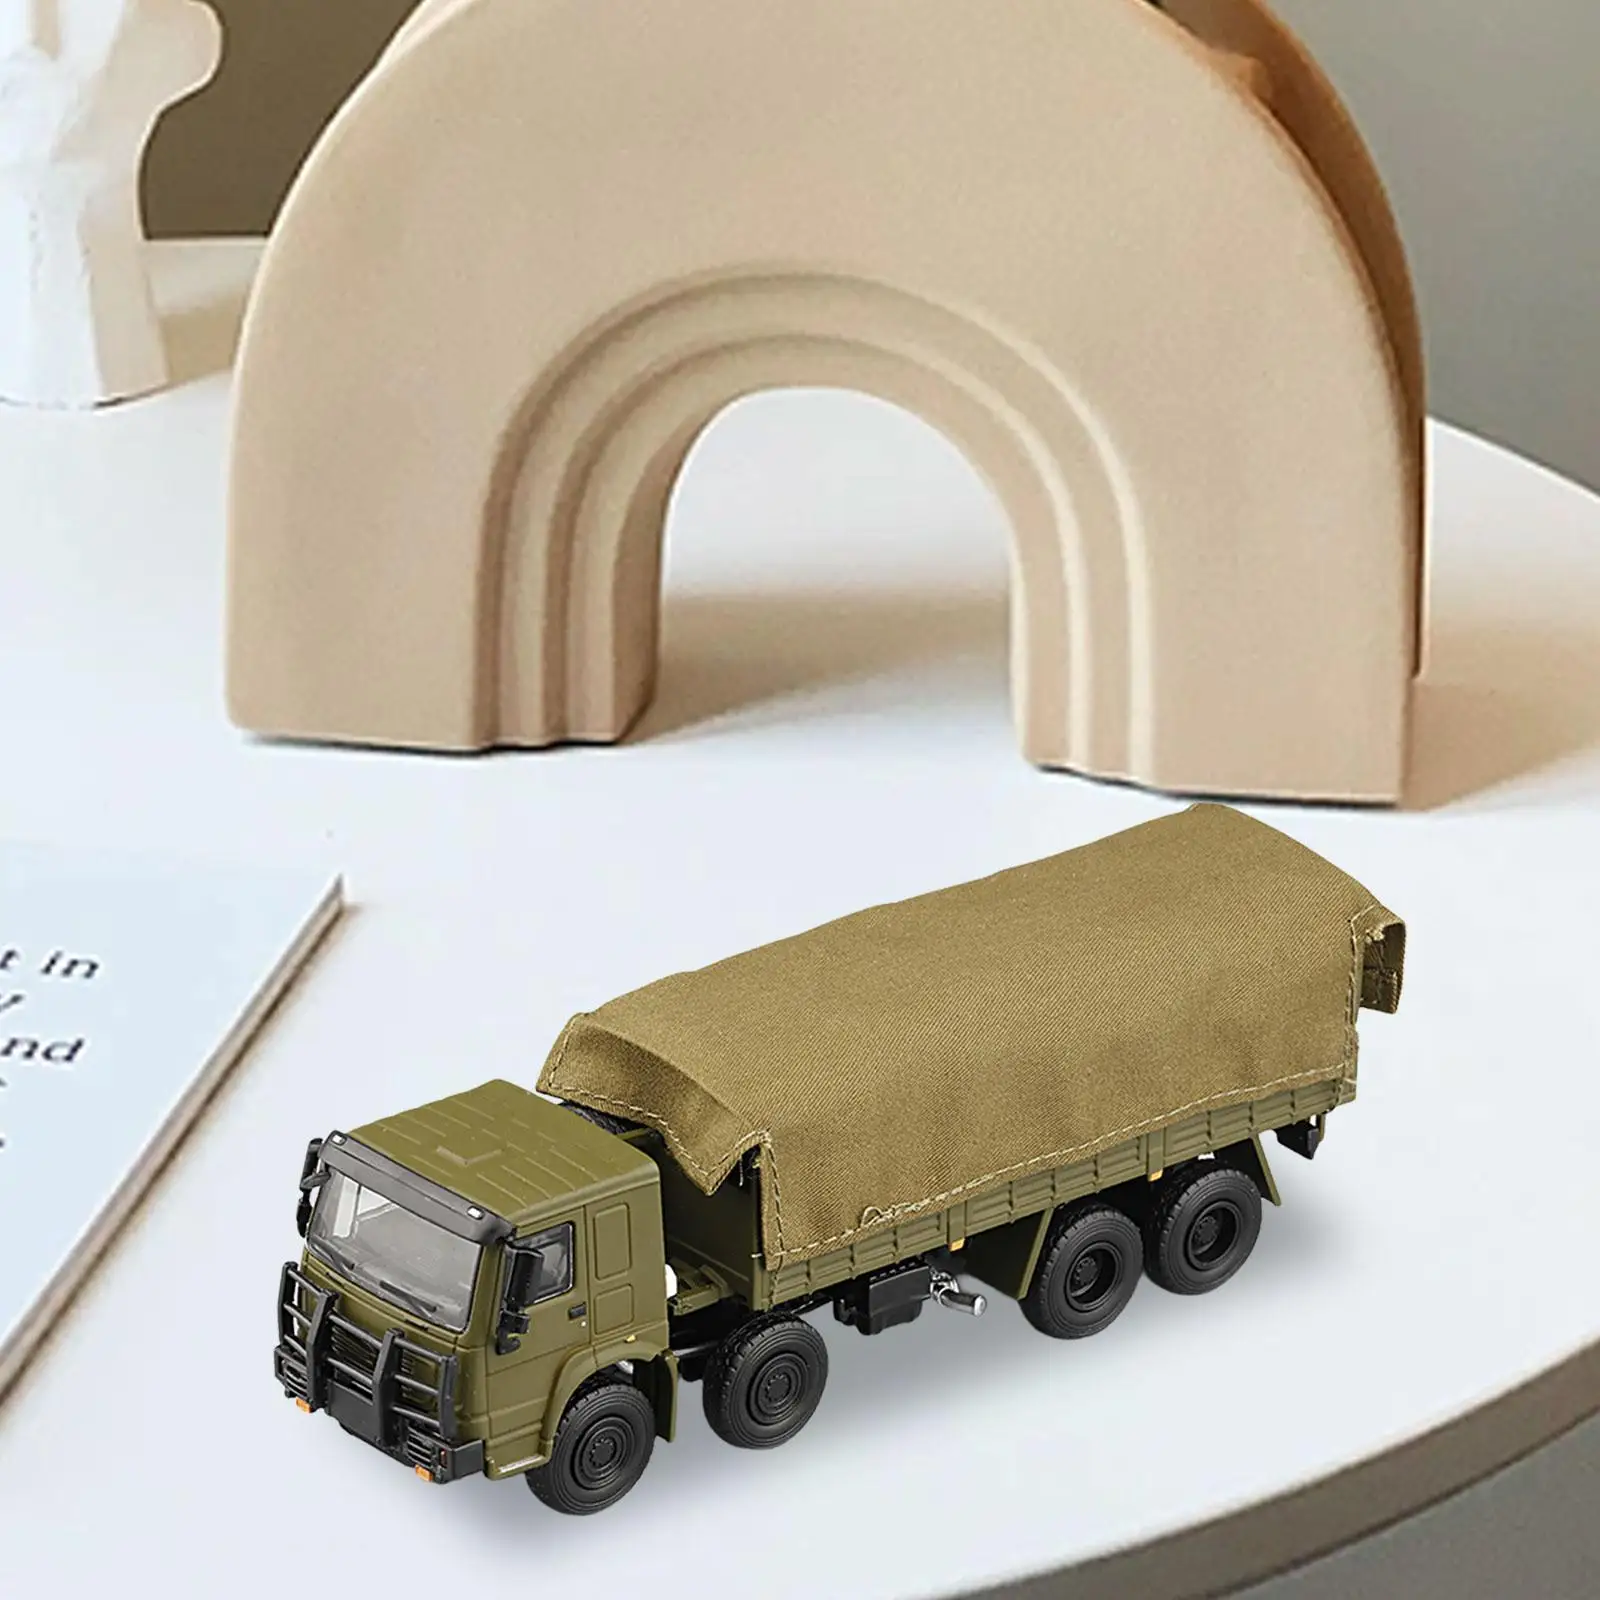 1/64 Car Model Sand Table Ornament Collection Mini Vehicles Toys for Miniature Scene Diorama Photography Props Decoration Layout